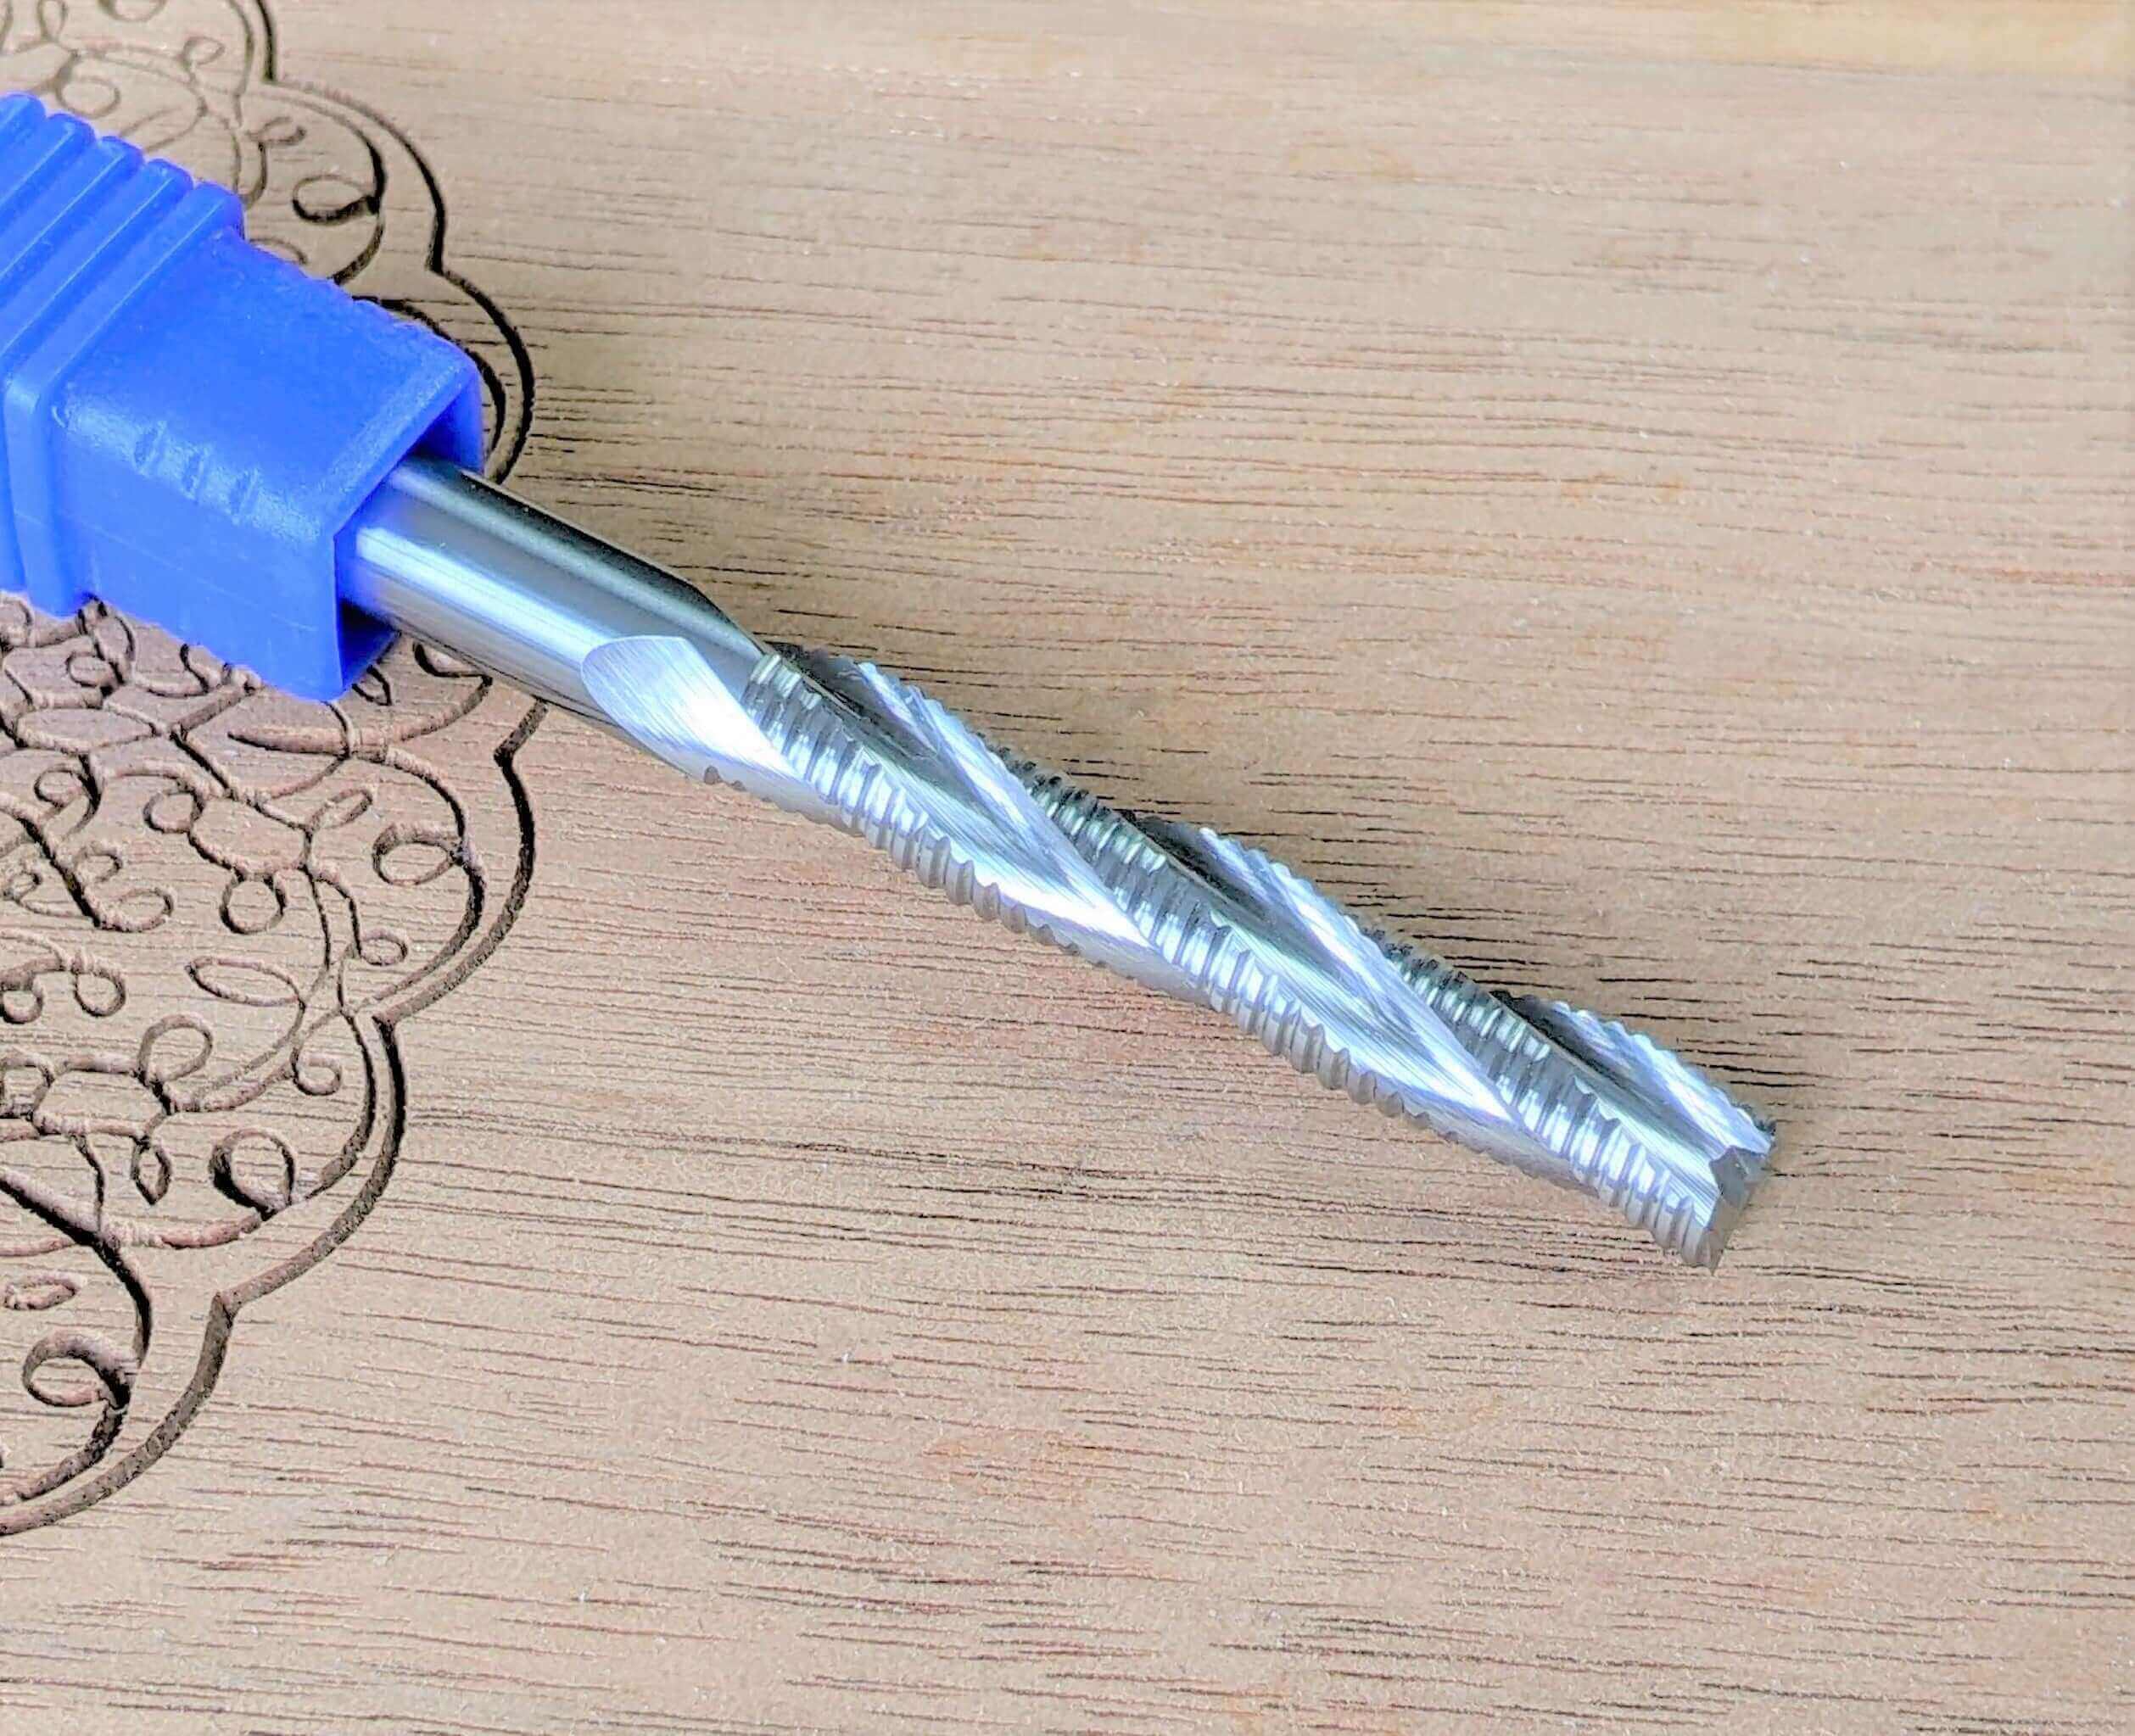 HOG CNC roughing router bit by idc woodcraft